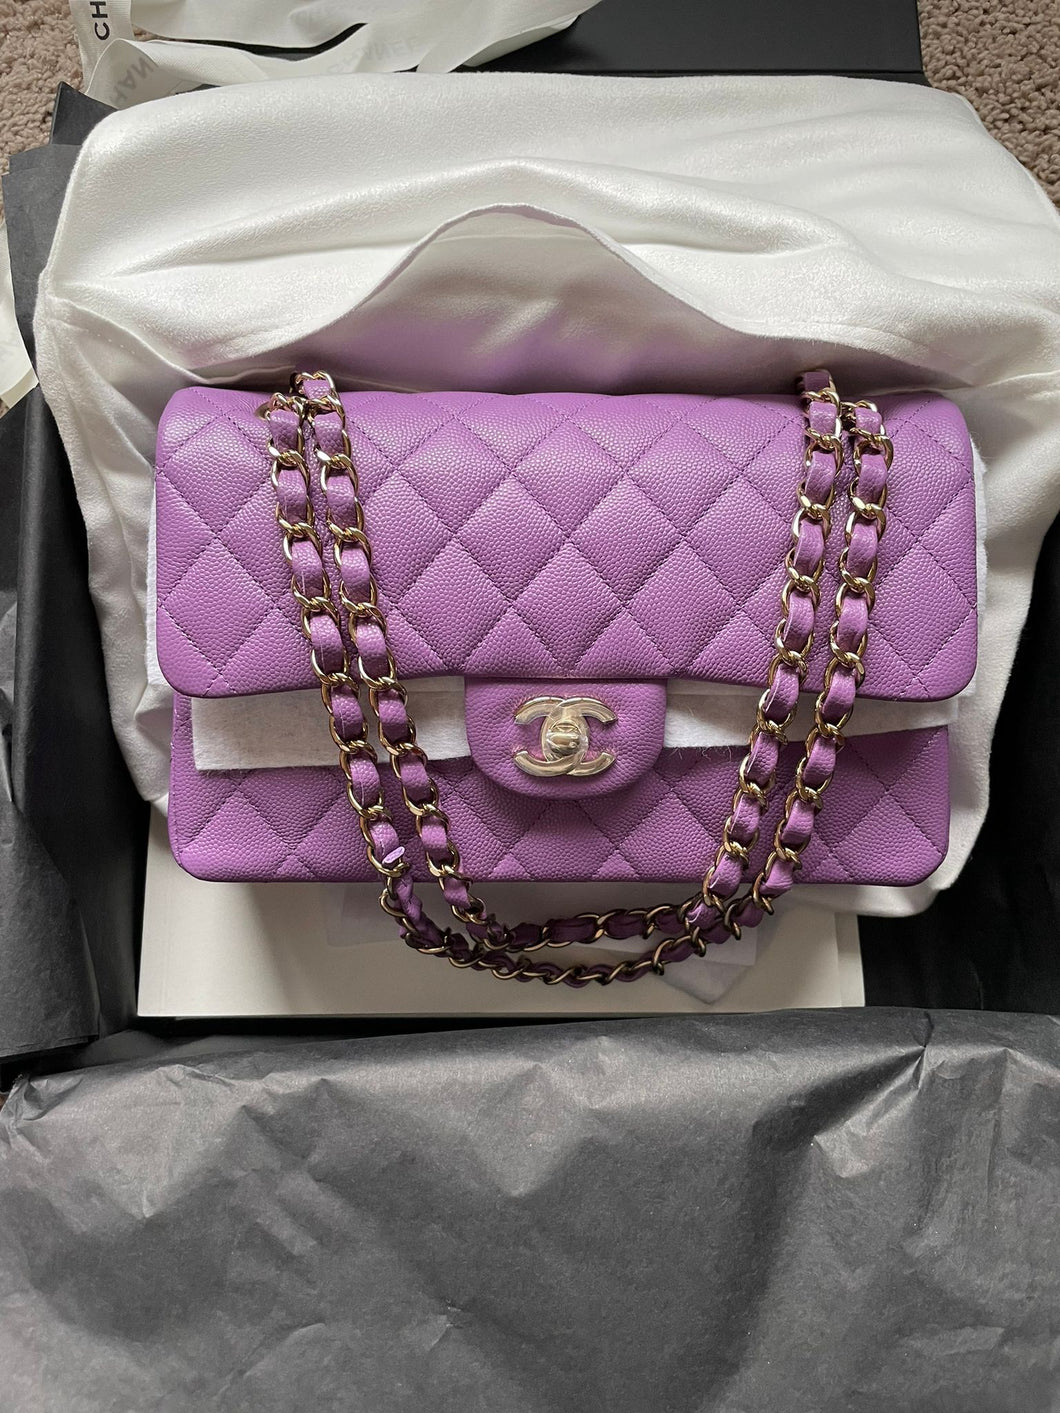 chanel red bag 2019